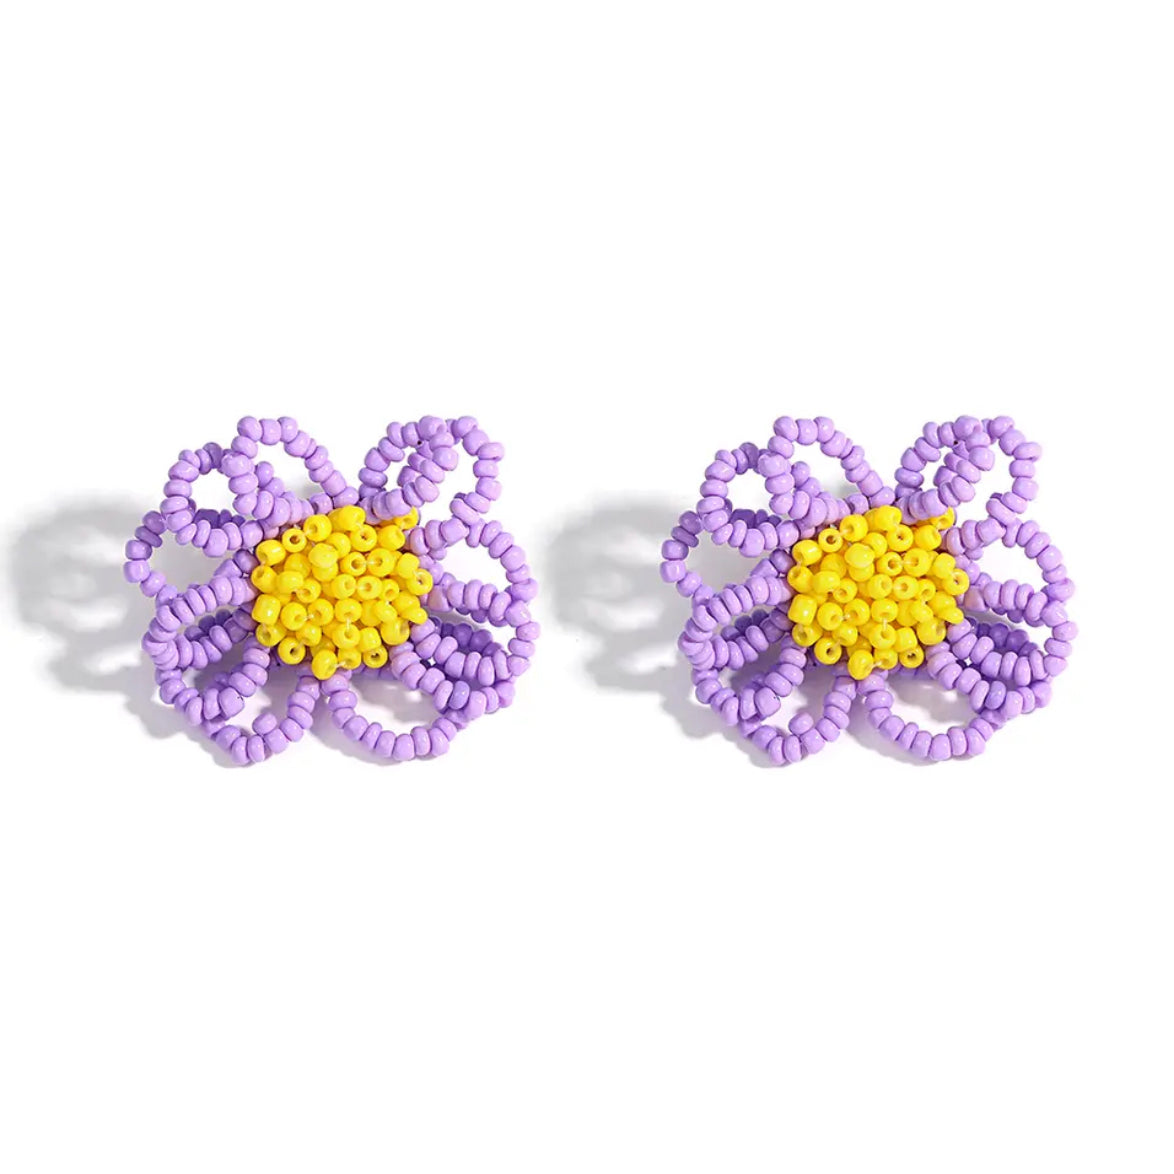 This dainty daisy clip-on pair of earrings is made of lavender and yellow seed beads, shop the best gift gifts for her for him from Inna carton online store dubai, UAE!